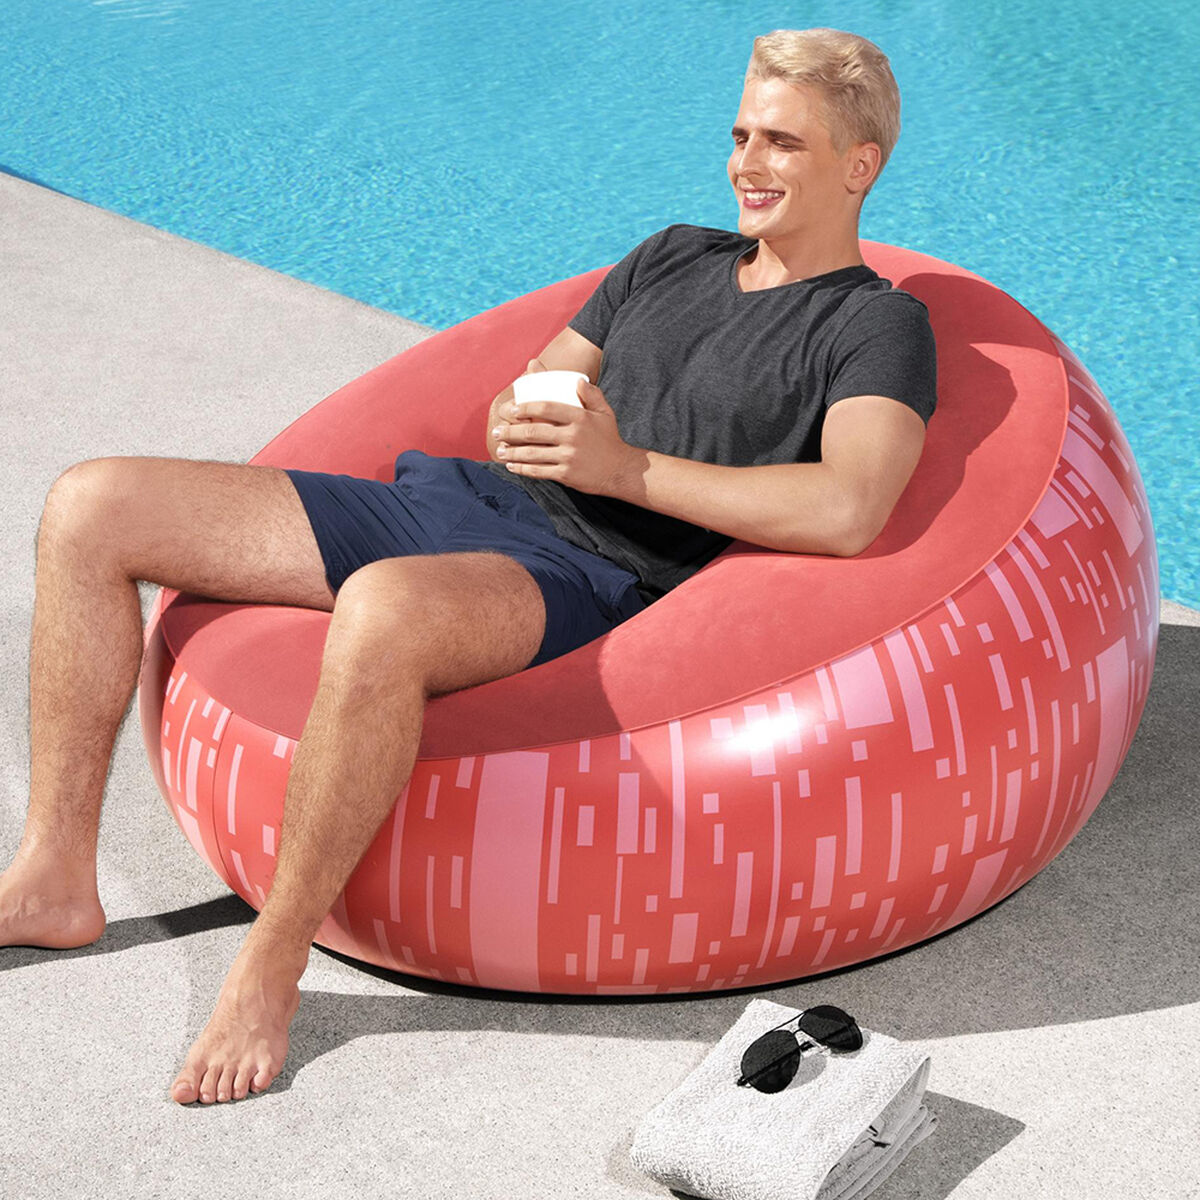 Sillón Inflable Bestway